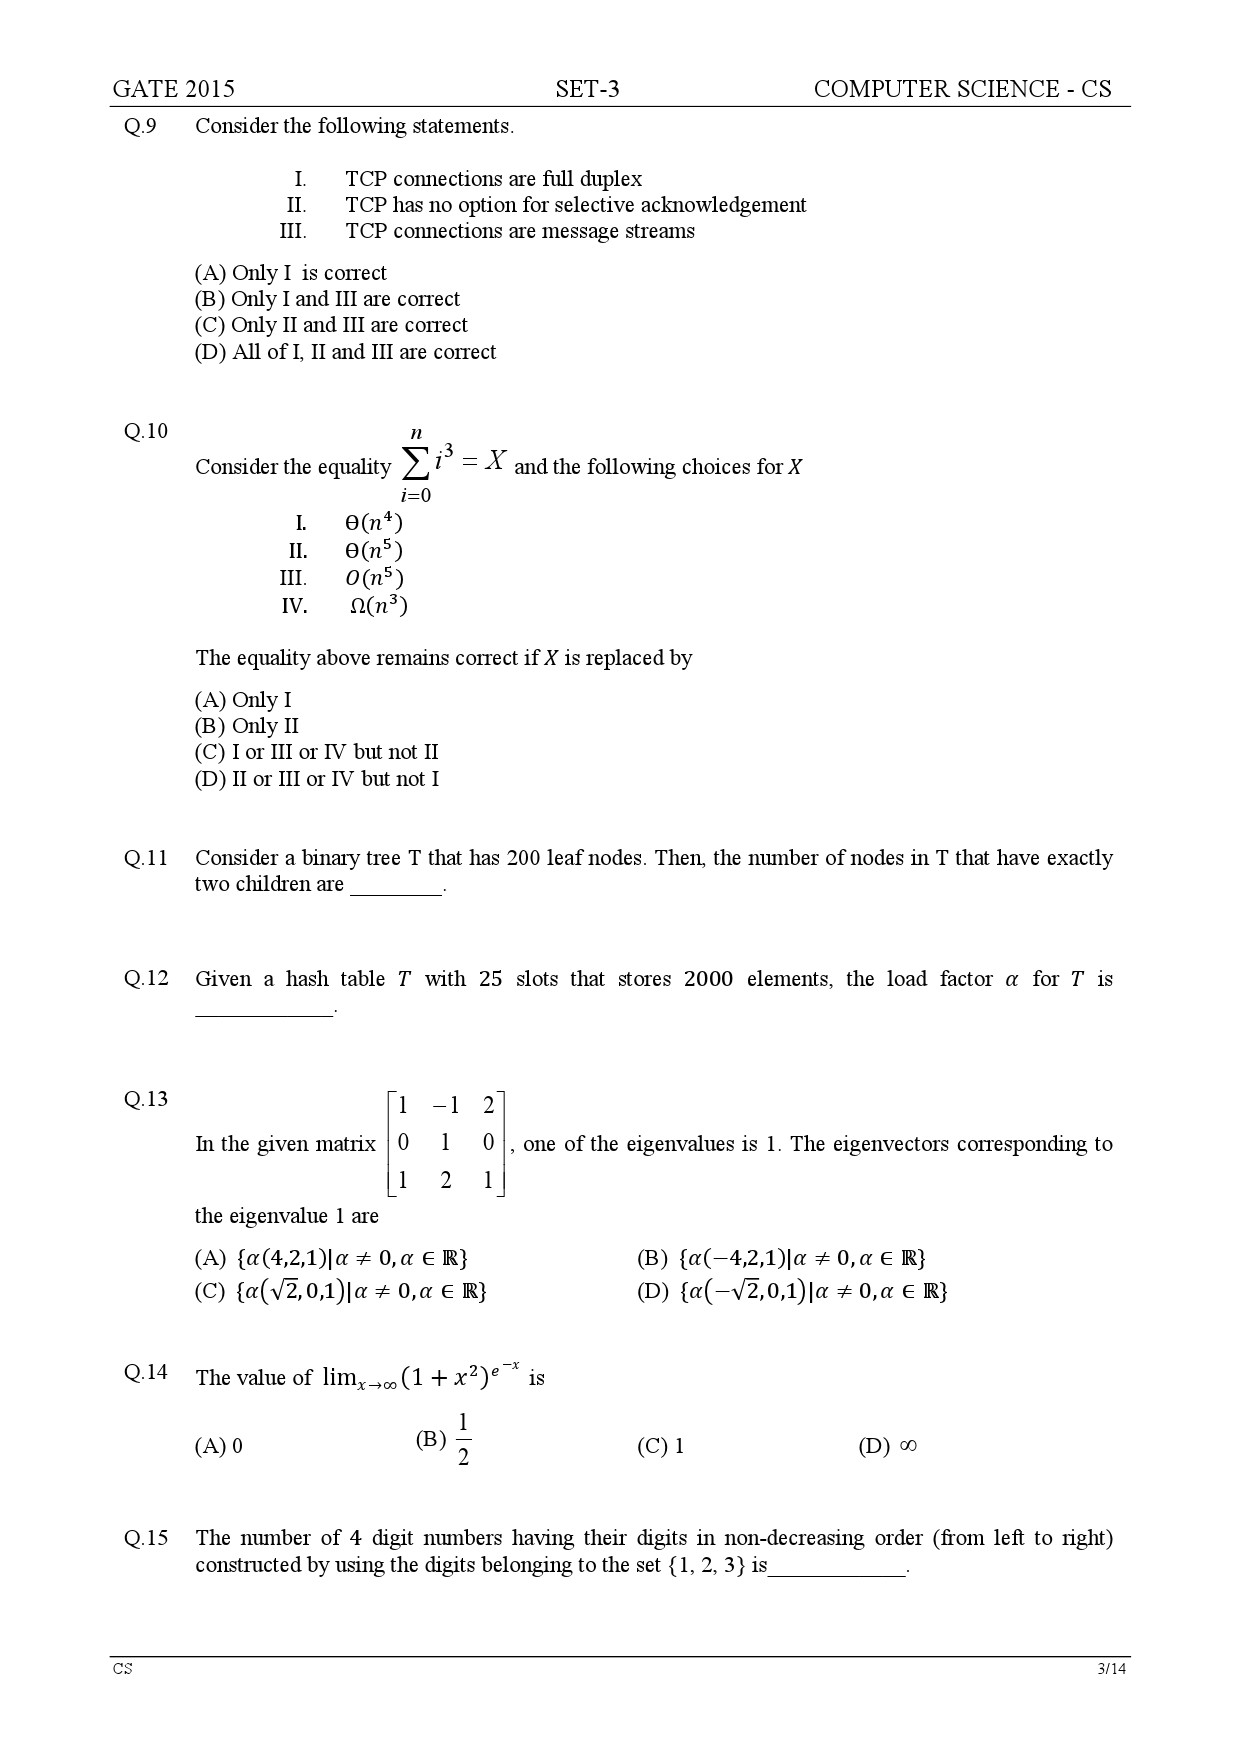 GATE Exam Question Paper 2015 Computer Science and Information Technology Set 3 3